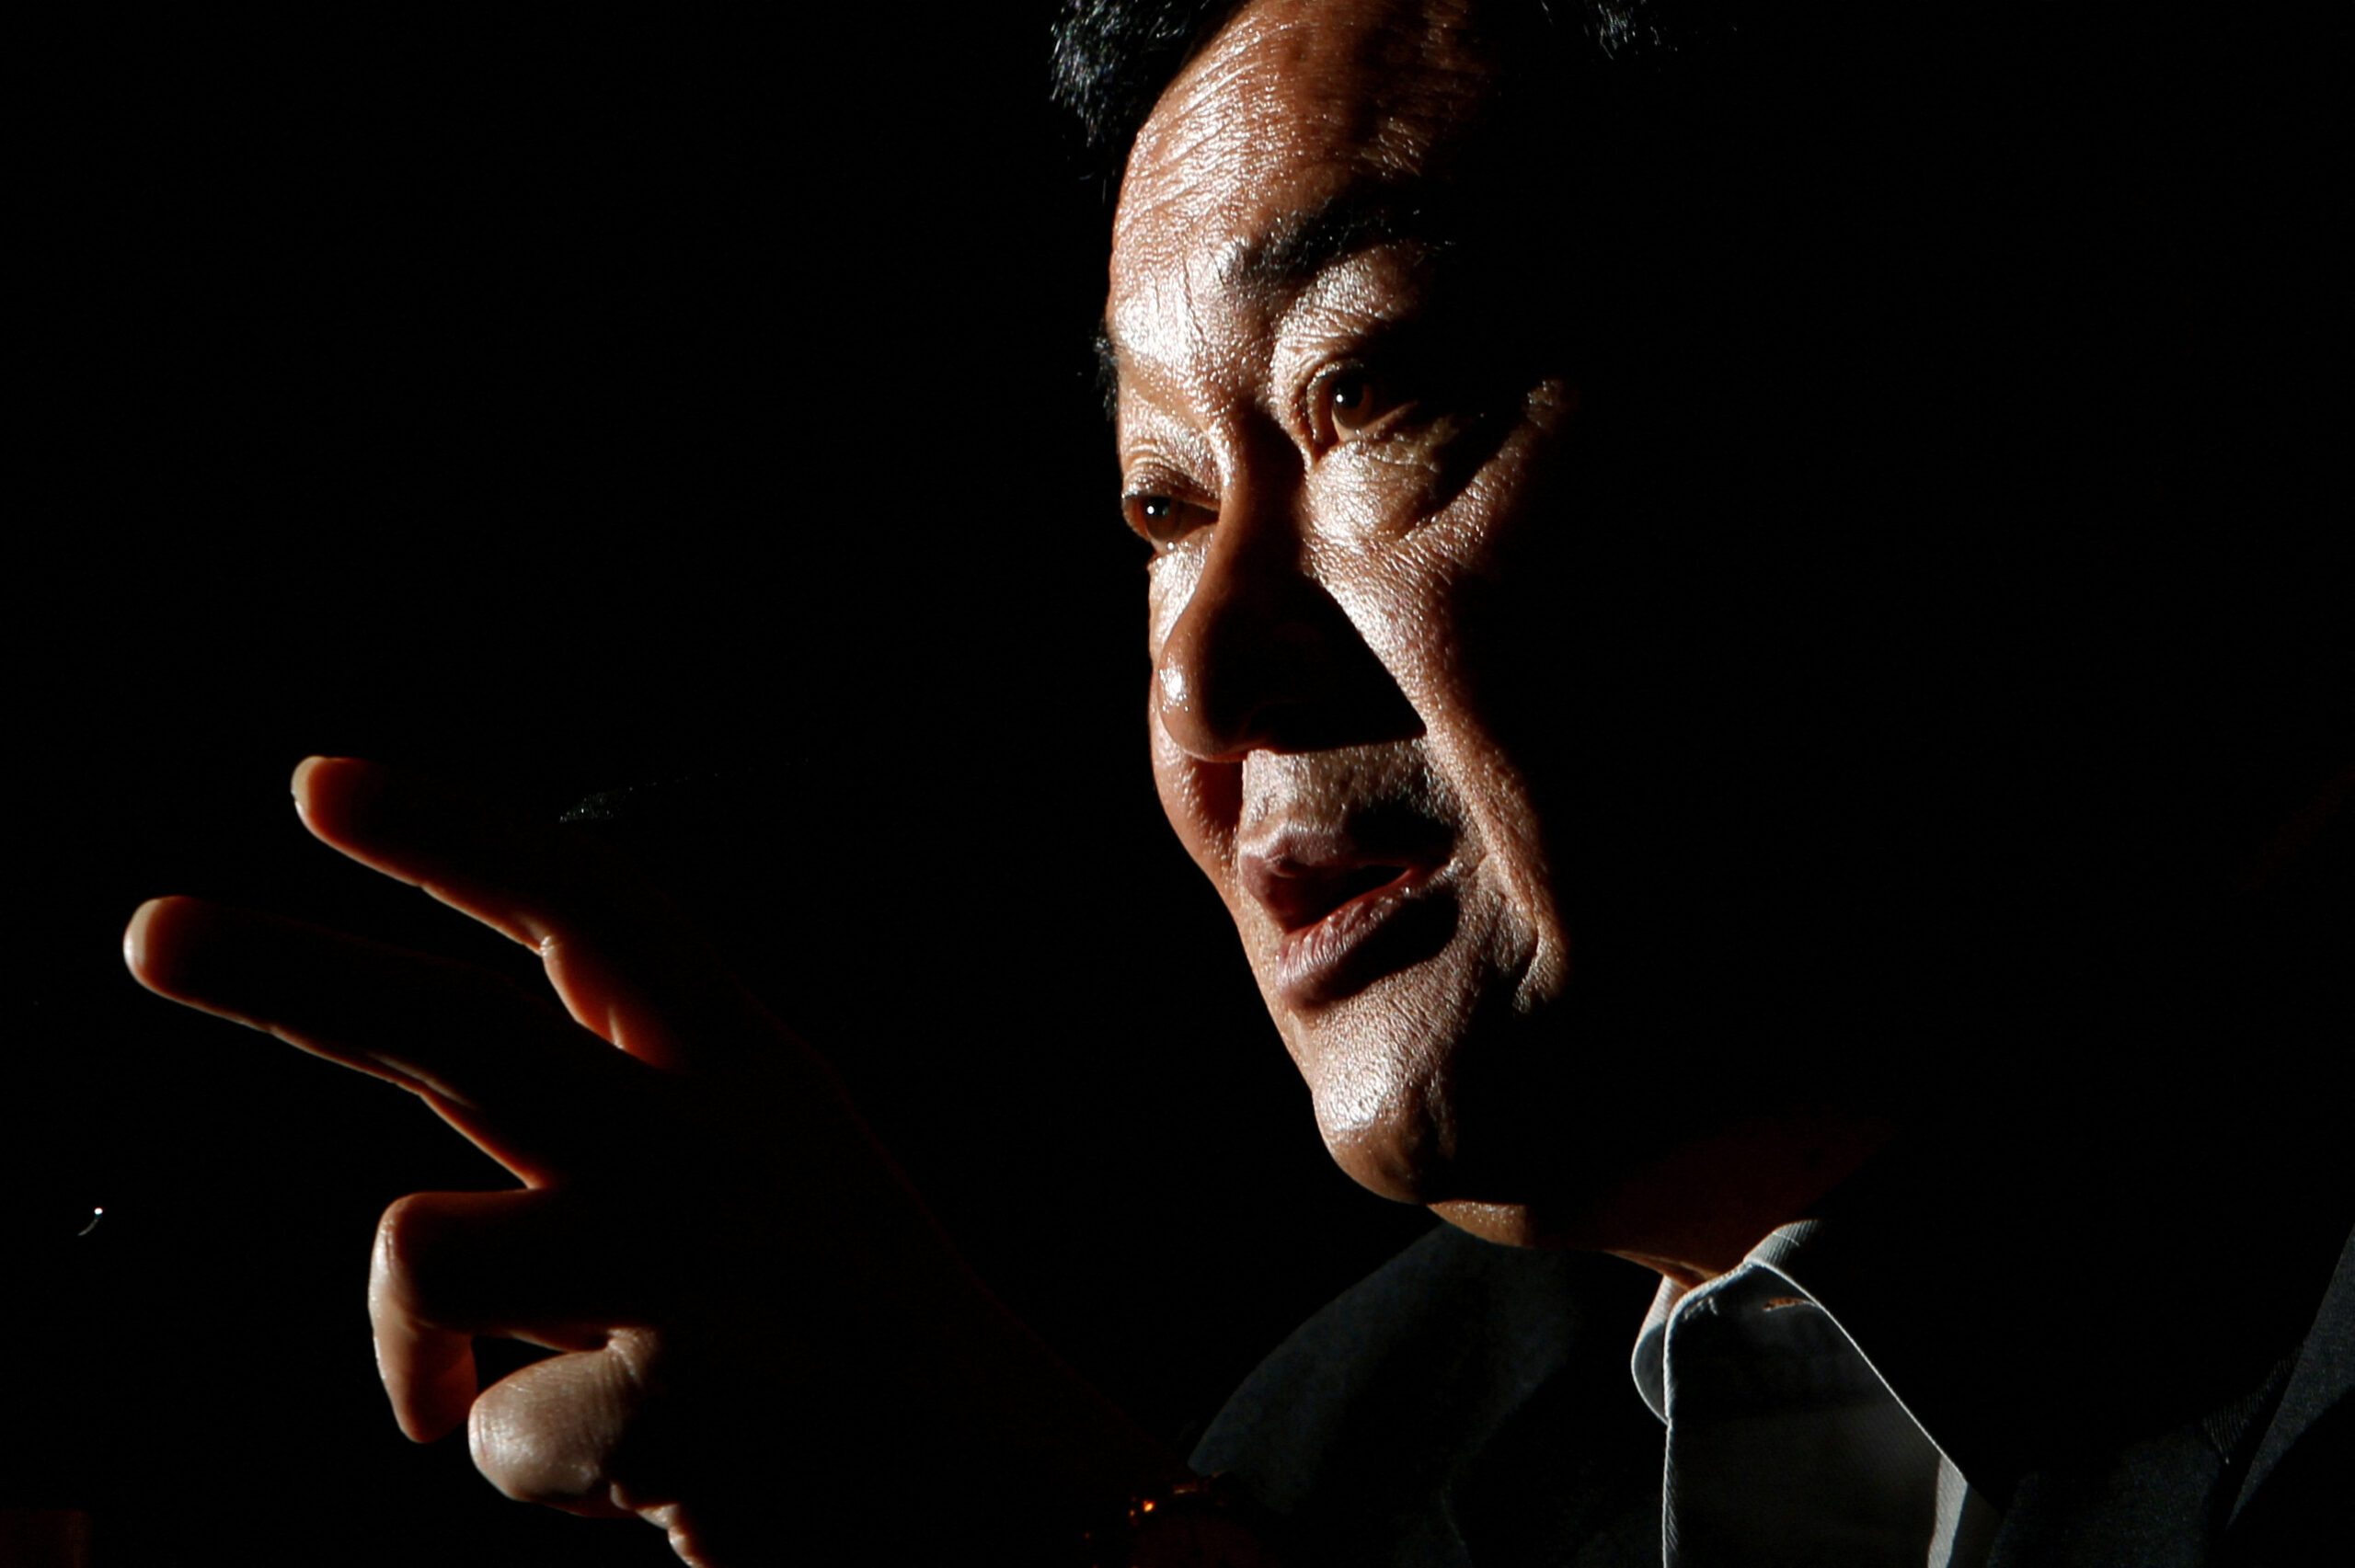 Thailand’s influential ex-PM Thaksin eyes July return from exile